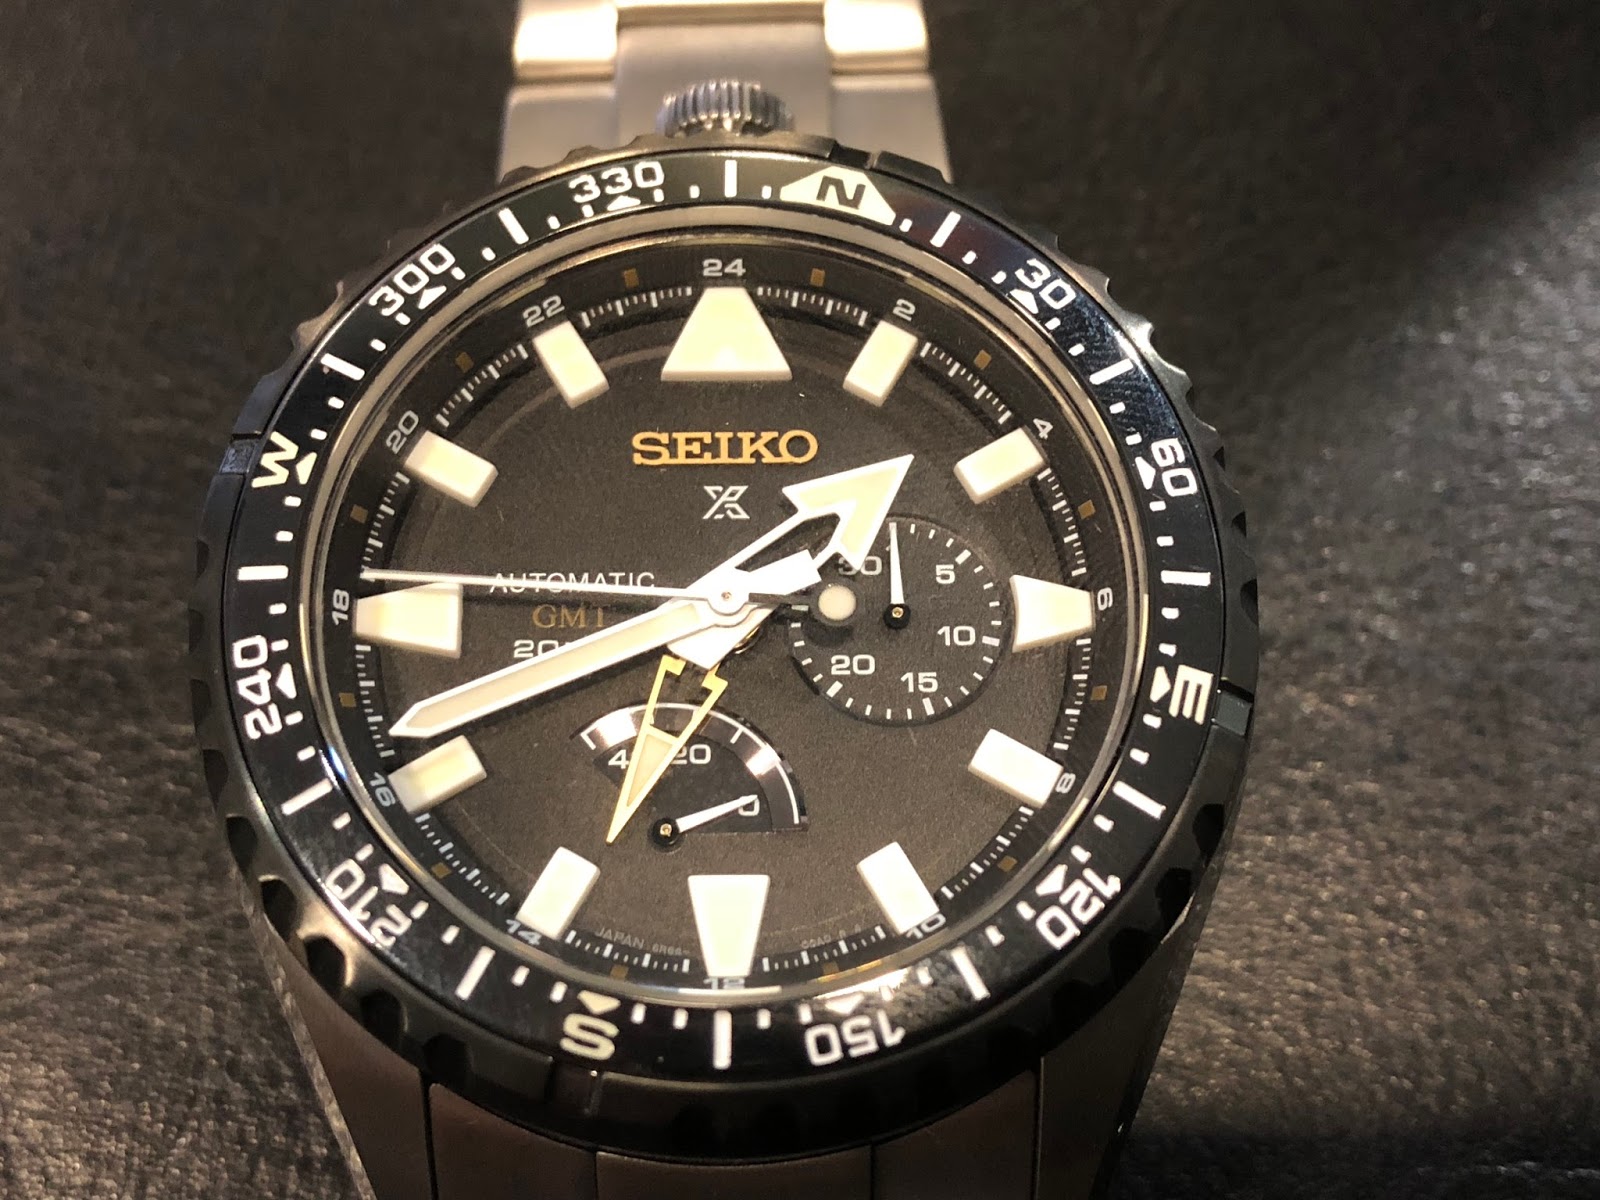 My Eastern Watch Collection: Seiko Prospex Watch Landmaster 25th  Anniversary Limited Titanium Model SBEJ003 (similar to SBEJ001) - Design  flaw & QC issues, A Review (plus Video)